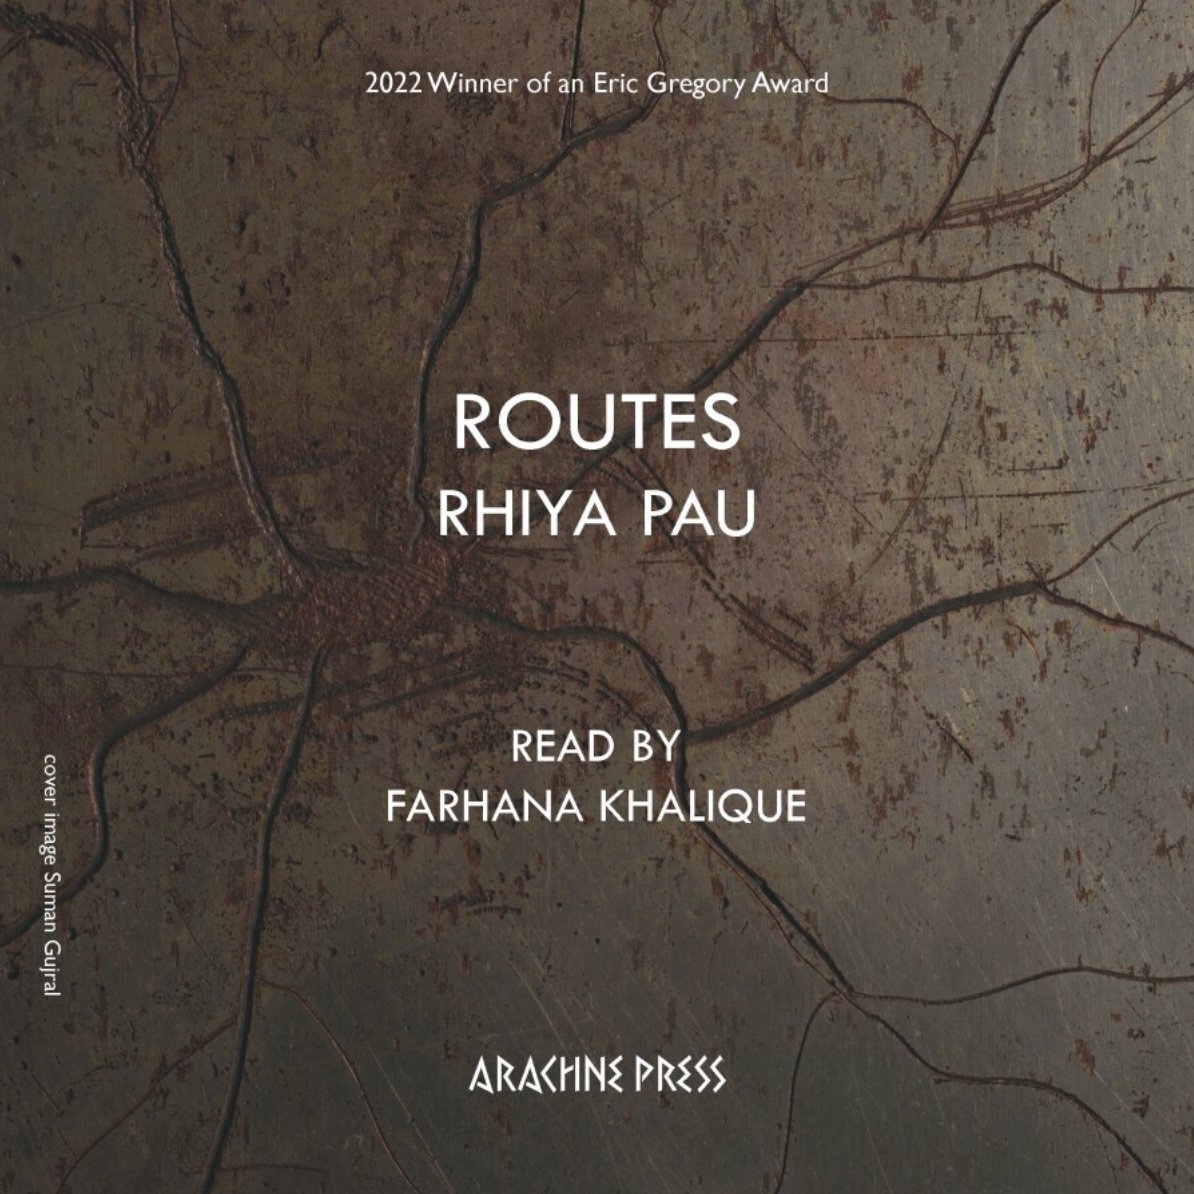 From our ✨Stunning Debuts✨collection. Recommendation 2/8: Routes by Rhiya Pau. Rhiya Pau’s tender poetry collection is brought to life by the subtly emotive narration of @hanakhalique. Pau beckons us to trace a profound route through her own roots, in a collection that